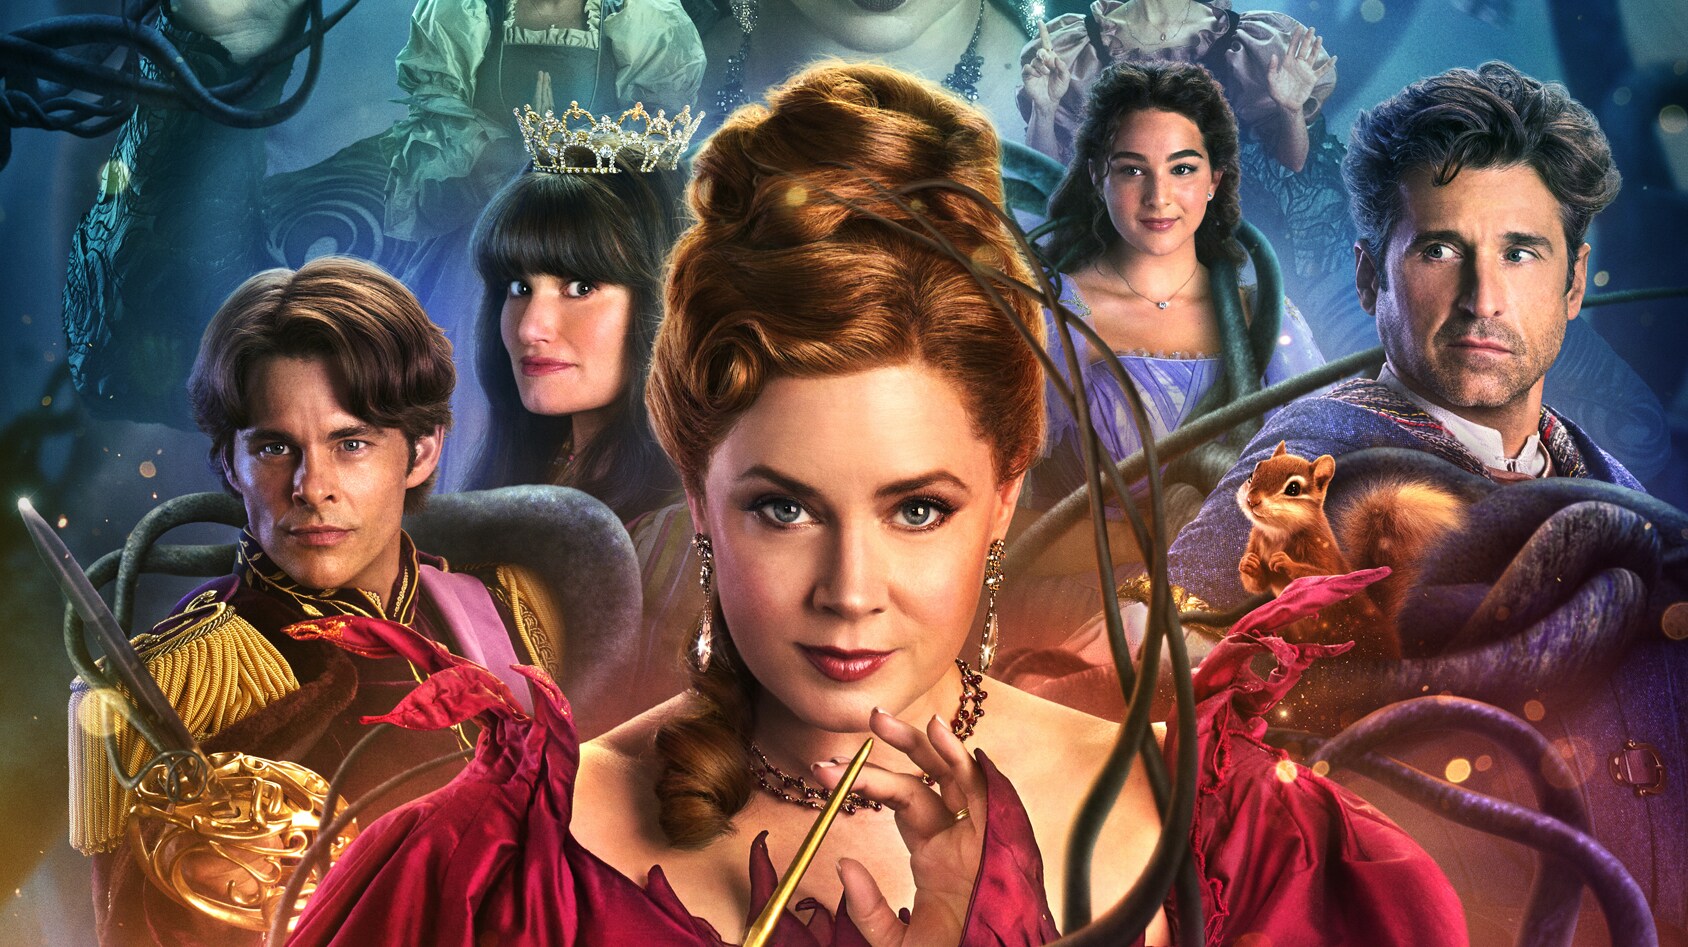 Magical Teaser Trailer And Key Art For Disney’s All-New Live-Action Musical Comedy “Disenchanted” Now Available